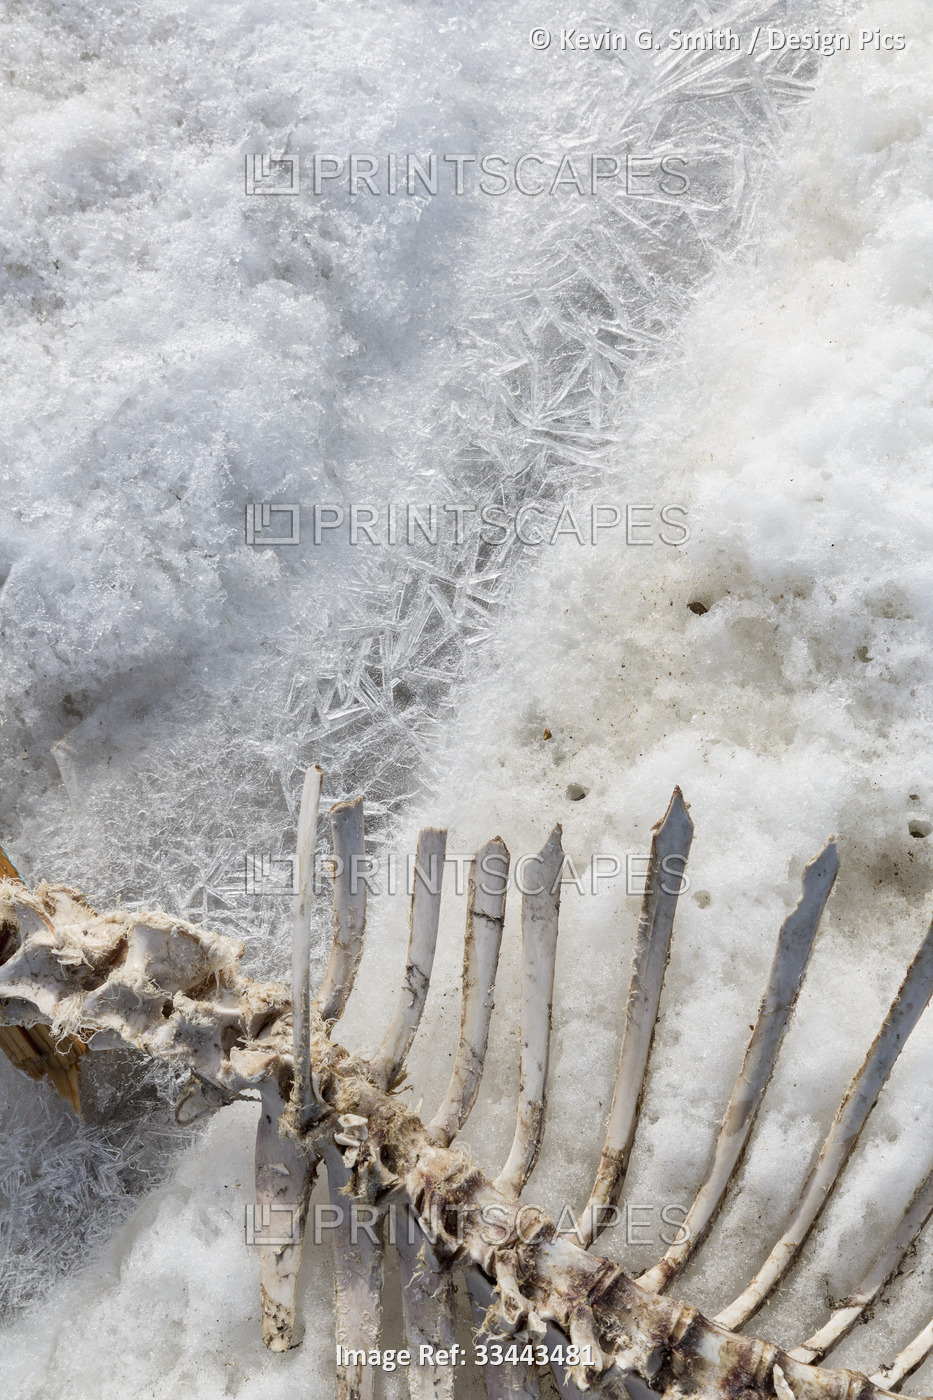 Close-up of the remains of a seal skeleton lying in the melting snow and ice ...